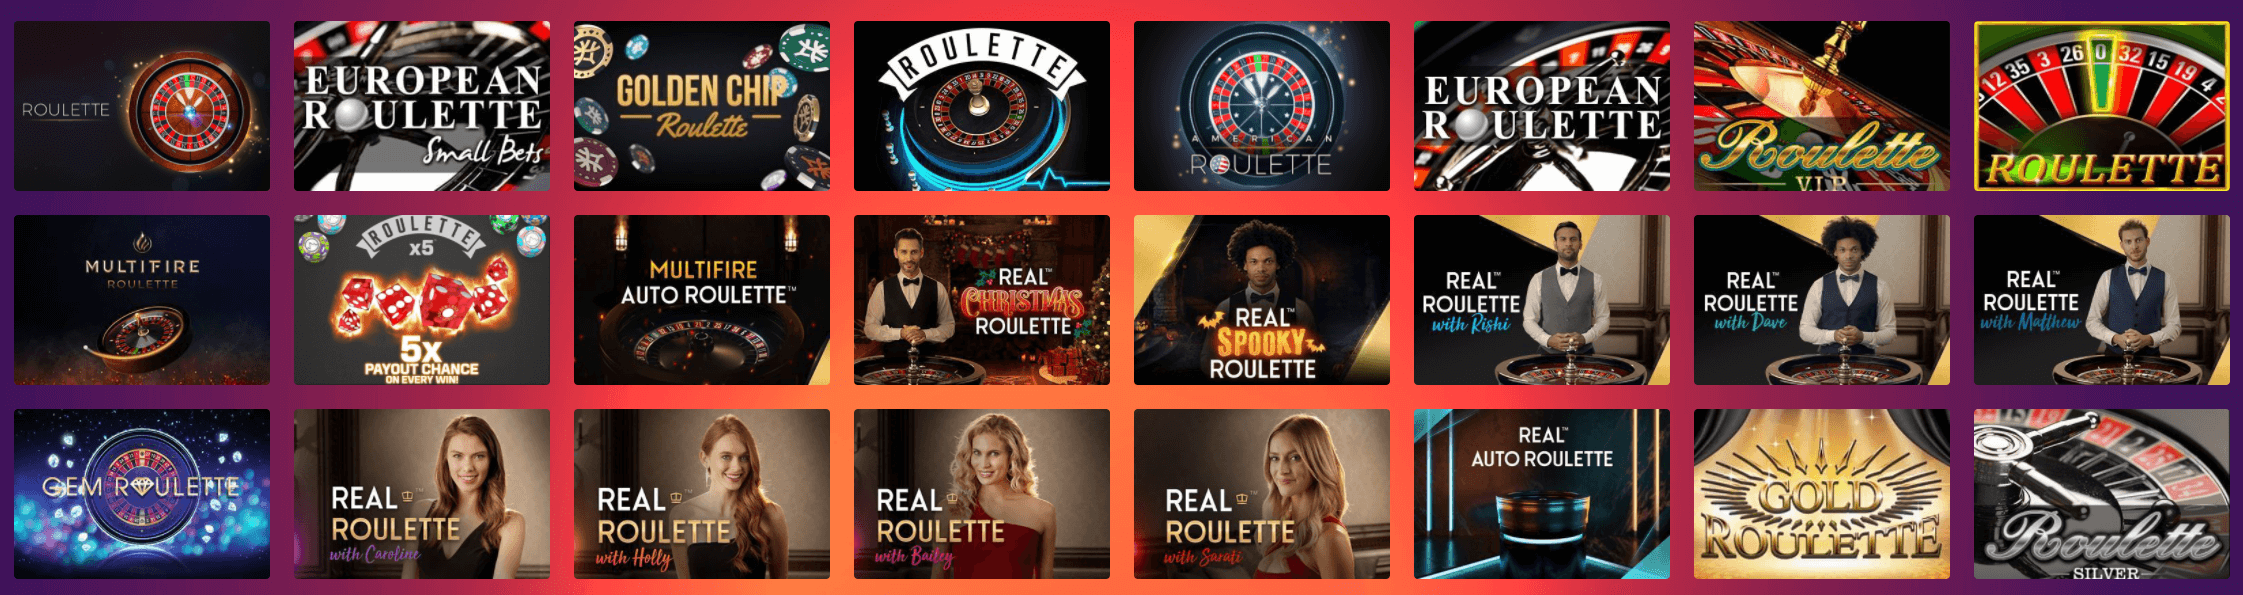 Casino Gods roulette games selection